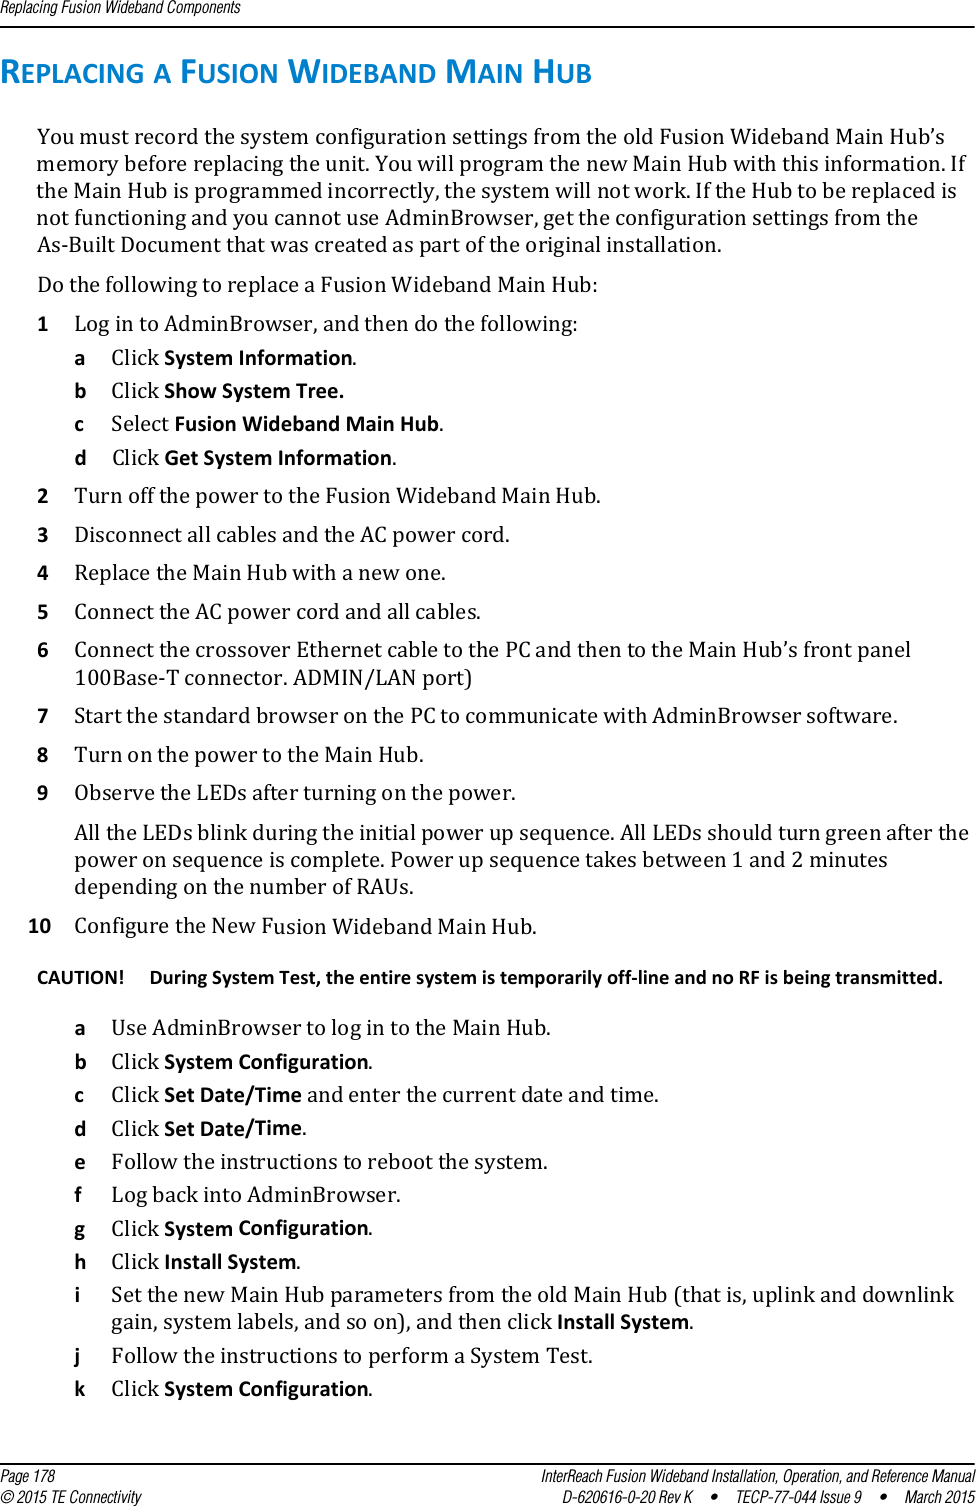 Replacing Fusion Wideband Components  Page 178 InterReach Fusion Wideband Installation, Operation, and Reference Manual© 2015 TE Connectivity D-620616-0-20 Rev K  •  TECP-77-044 Issue 9  •  March 2015REPLACING A FUSION WIDEBAND MAIN HUBYou must record the system configuration settings from the old Fusion Wideband Main Hub’s memory before replacing the unit. You will program the new Main Hub with this information. If the Main Hub is programmed incorrectly, the system will not work. If the Hub to be replaced is not functioning and you cannot use AdminBrowser, get the configuration settings from the As-Built Document that was created as part of the original installation.Do the following to replace a Fusion Wideband Main Hub:1Log in to AdminBrowser, and then do the following:aClick System Information.bClick Show System Tree.cSelect Fusion Wideband Main Hub.dClick Get System Information.2Turn off the power to the Fusion Wideband Main Hub.3Disconnect all cables and the AC power cord.4Replace the Main Hub with a new one.5Connect the AC power cord and all cables.6Connect the crossover Ethernet cable to the PC and then to the Main Hub’s front panel 100Base-T connector. ADMIN/LAN port)7Start the standard browser on the PC to communicate with AdminBrowser software.8Turn on the power to the Main Hub.9Observe the LEDs after turning on the power.All the LEDs blink during the initial power up sequence. All LEDs should turn green after the power on sequence is complete. Power up sequence takes between 1 and 2 minutes depending on the number of RAUs.10 Configure the New Fusion Wideband Main Hub.CAUTION! During System Test, the entire system is temporarily off-line and no RF is being transmitted. aUse AdminBrowser to log in to the Main Hub.bClick System Configuration.cClick Set Date/Time and enter the current date and time. dClick Set Date/Time.eFollow the instructions to reboot the system.fLog back into AdminBrowser.gClick System Configuration.hClick Install System. iSet the new Main Hub parameters from the old Main Hub (that is, uplink and downlink gain, system labels, and so on), and then click Install System.jFollow the instructions to perform a System Test.kClick System Configuration.